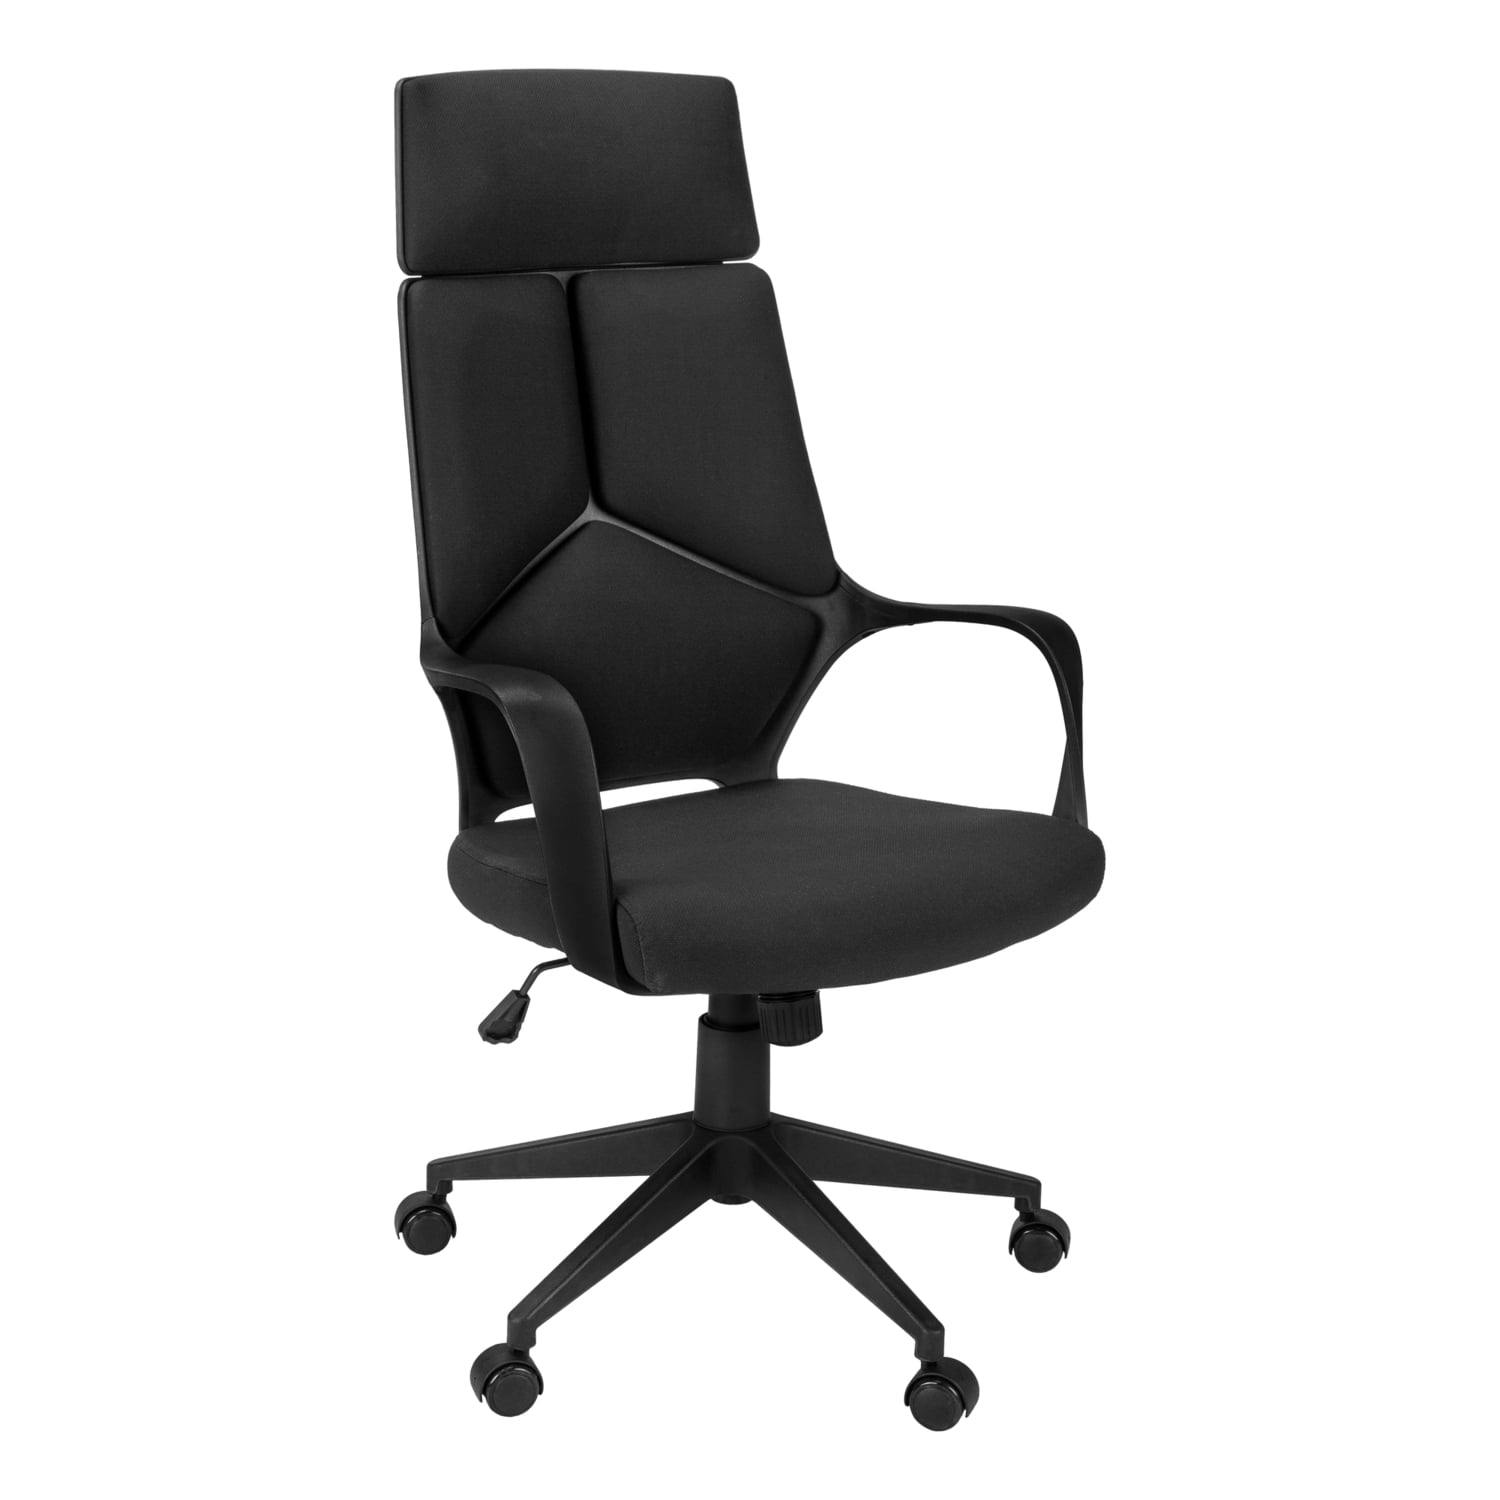 Lucian High-Back Executive Swivel Office Chair in Black Fabric